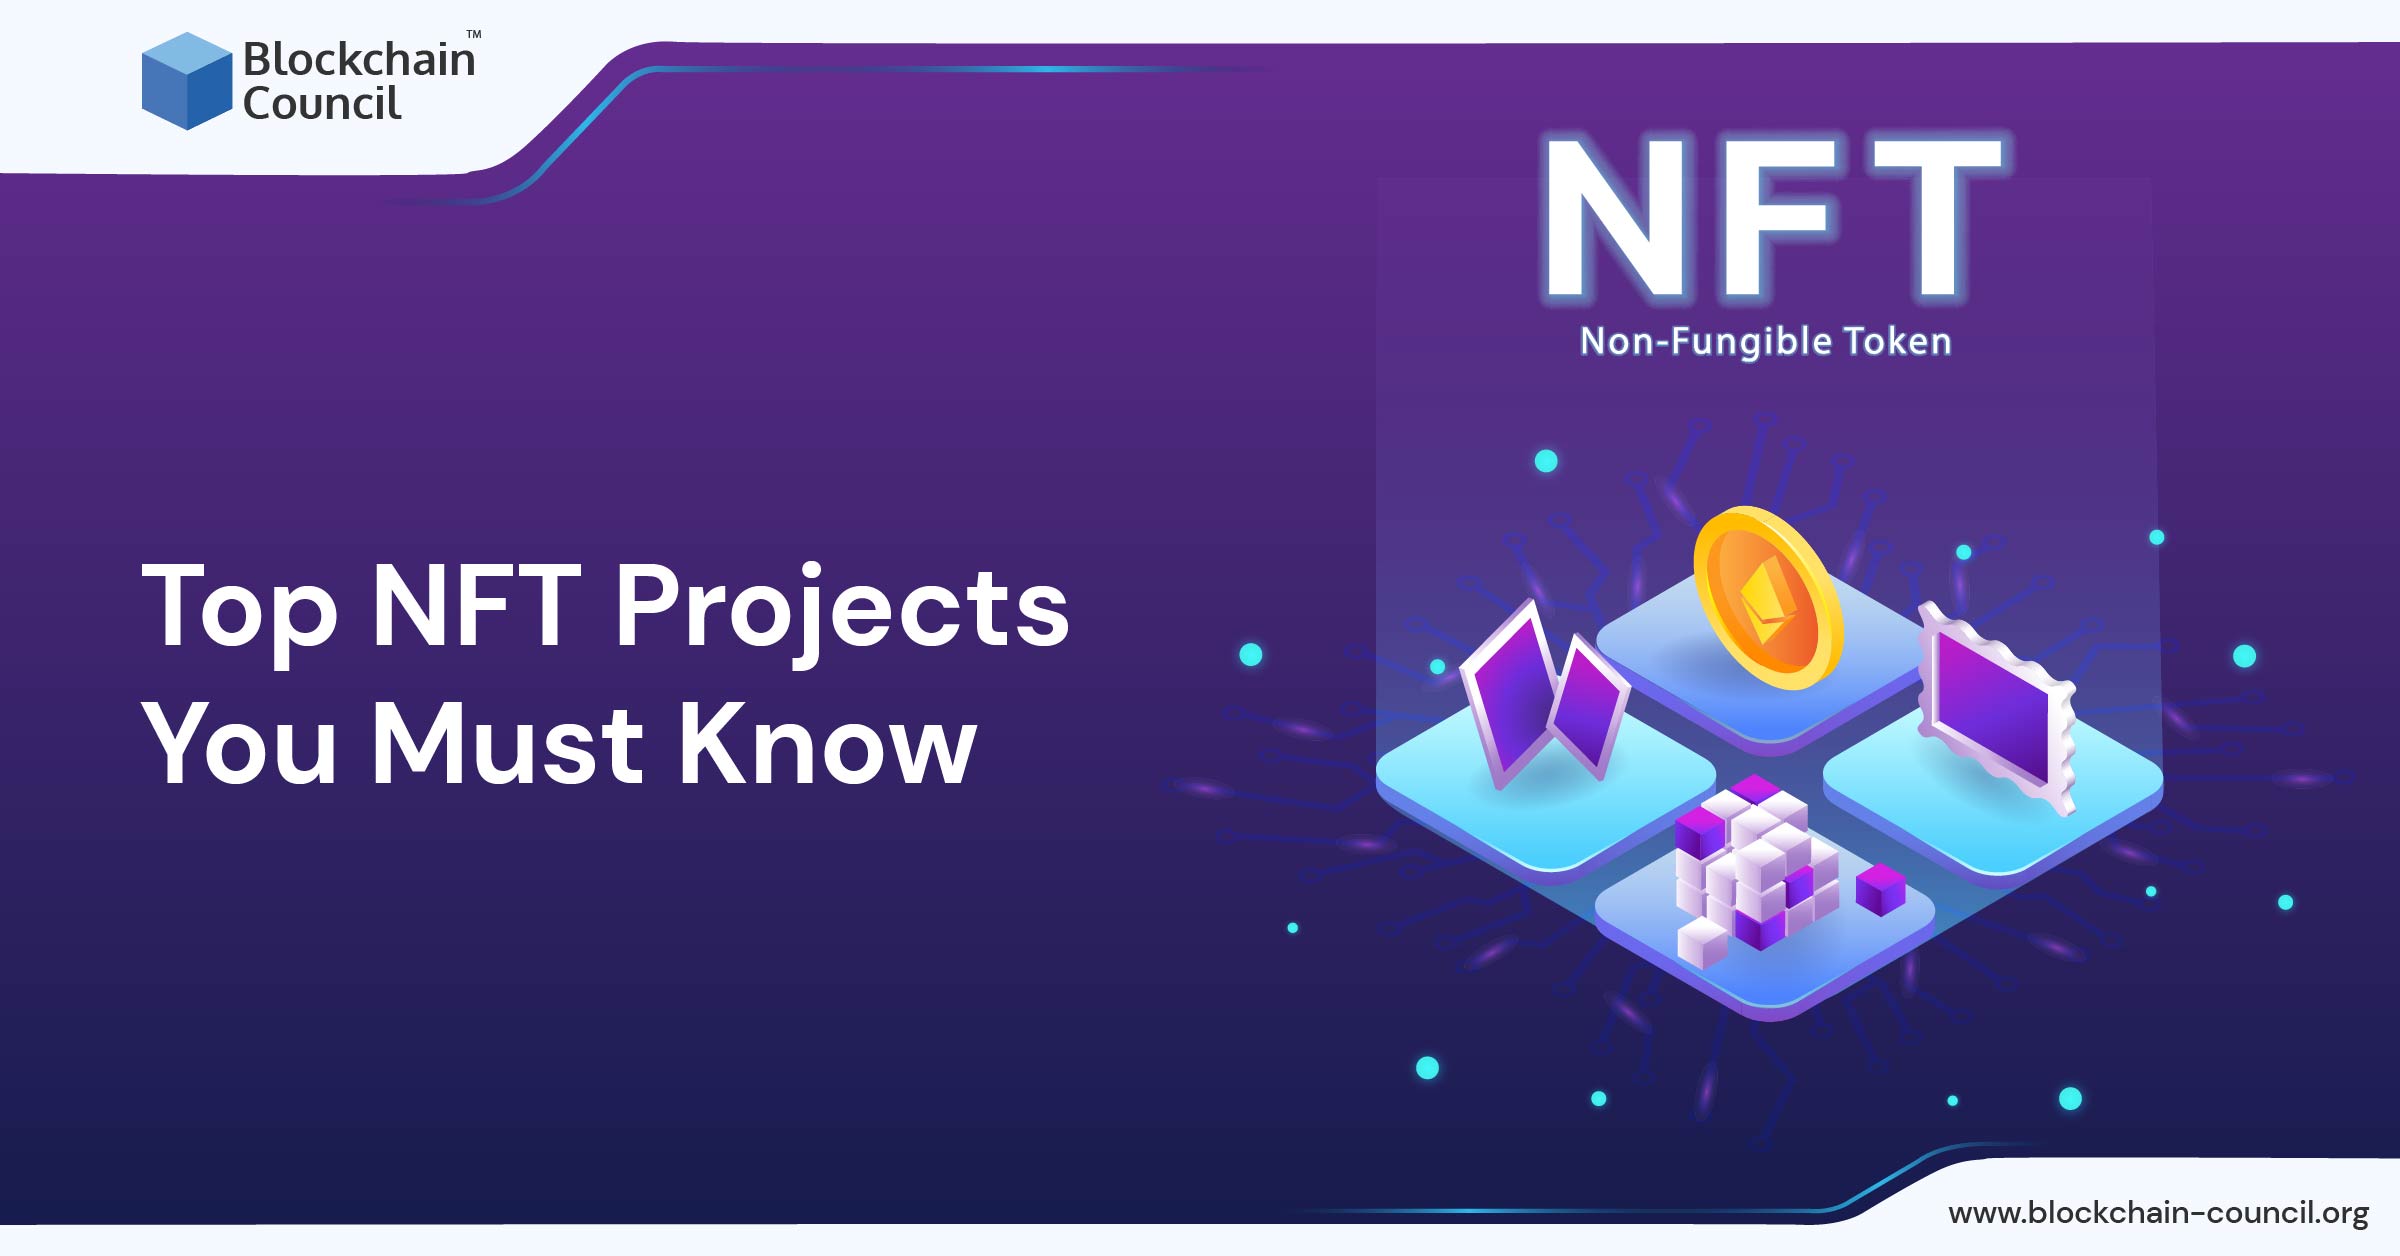 If you want to stay on top of an NFT project, look at their